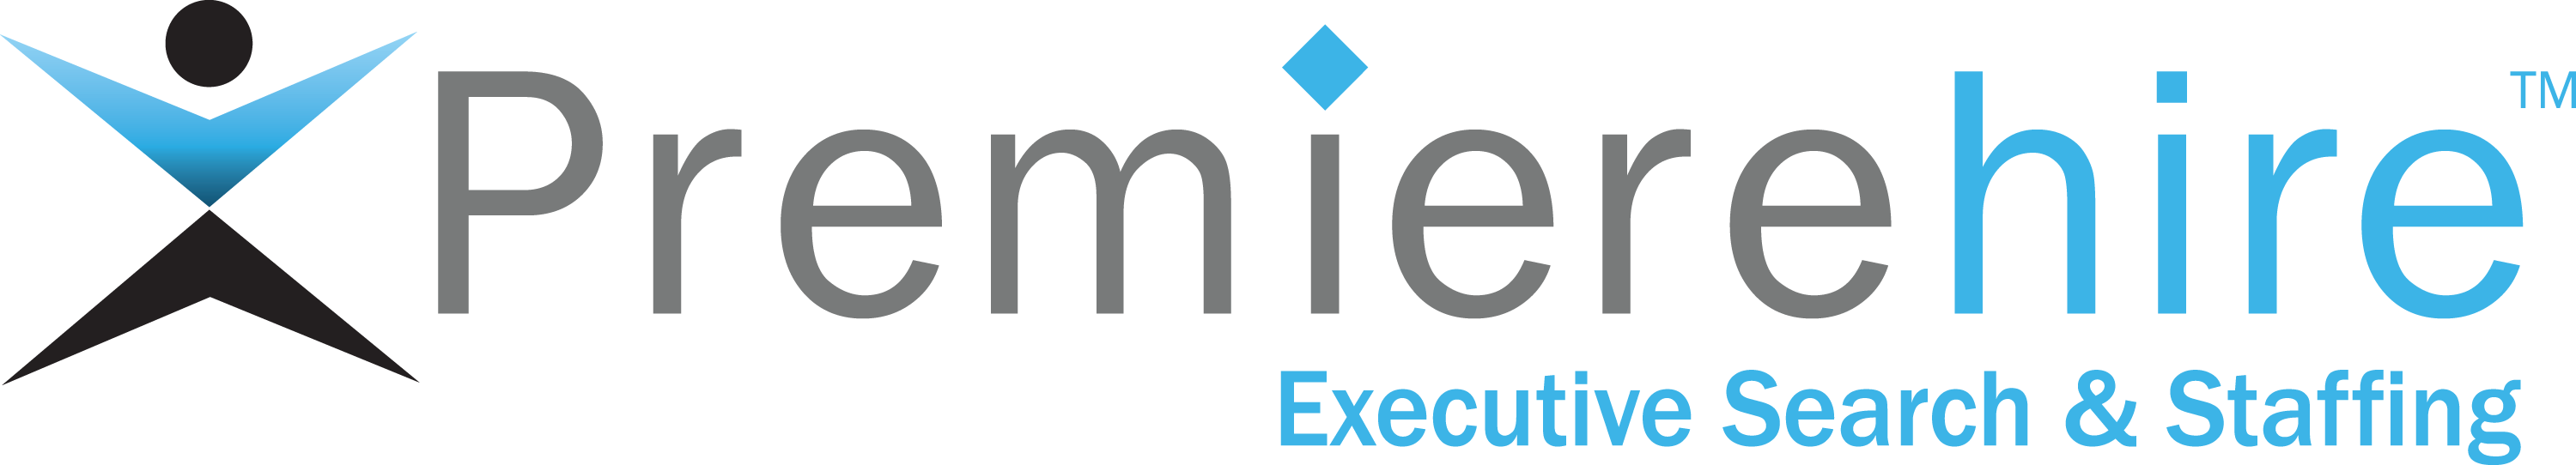 Premierehire Executive Search and Staffing